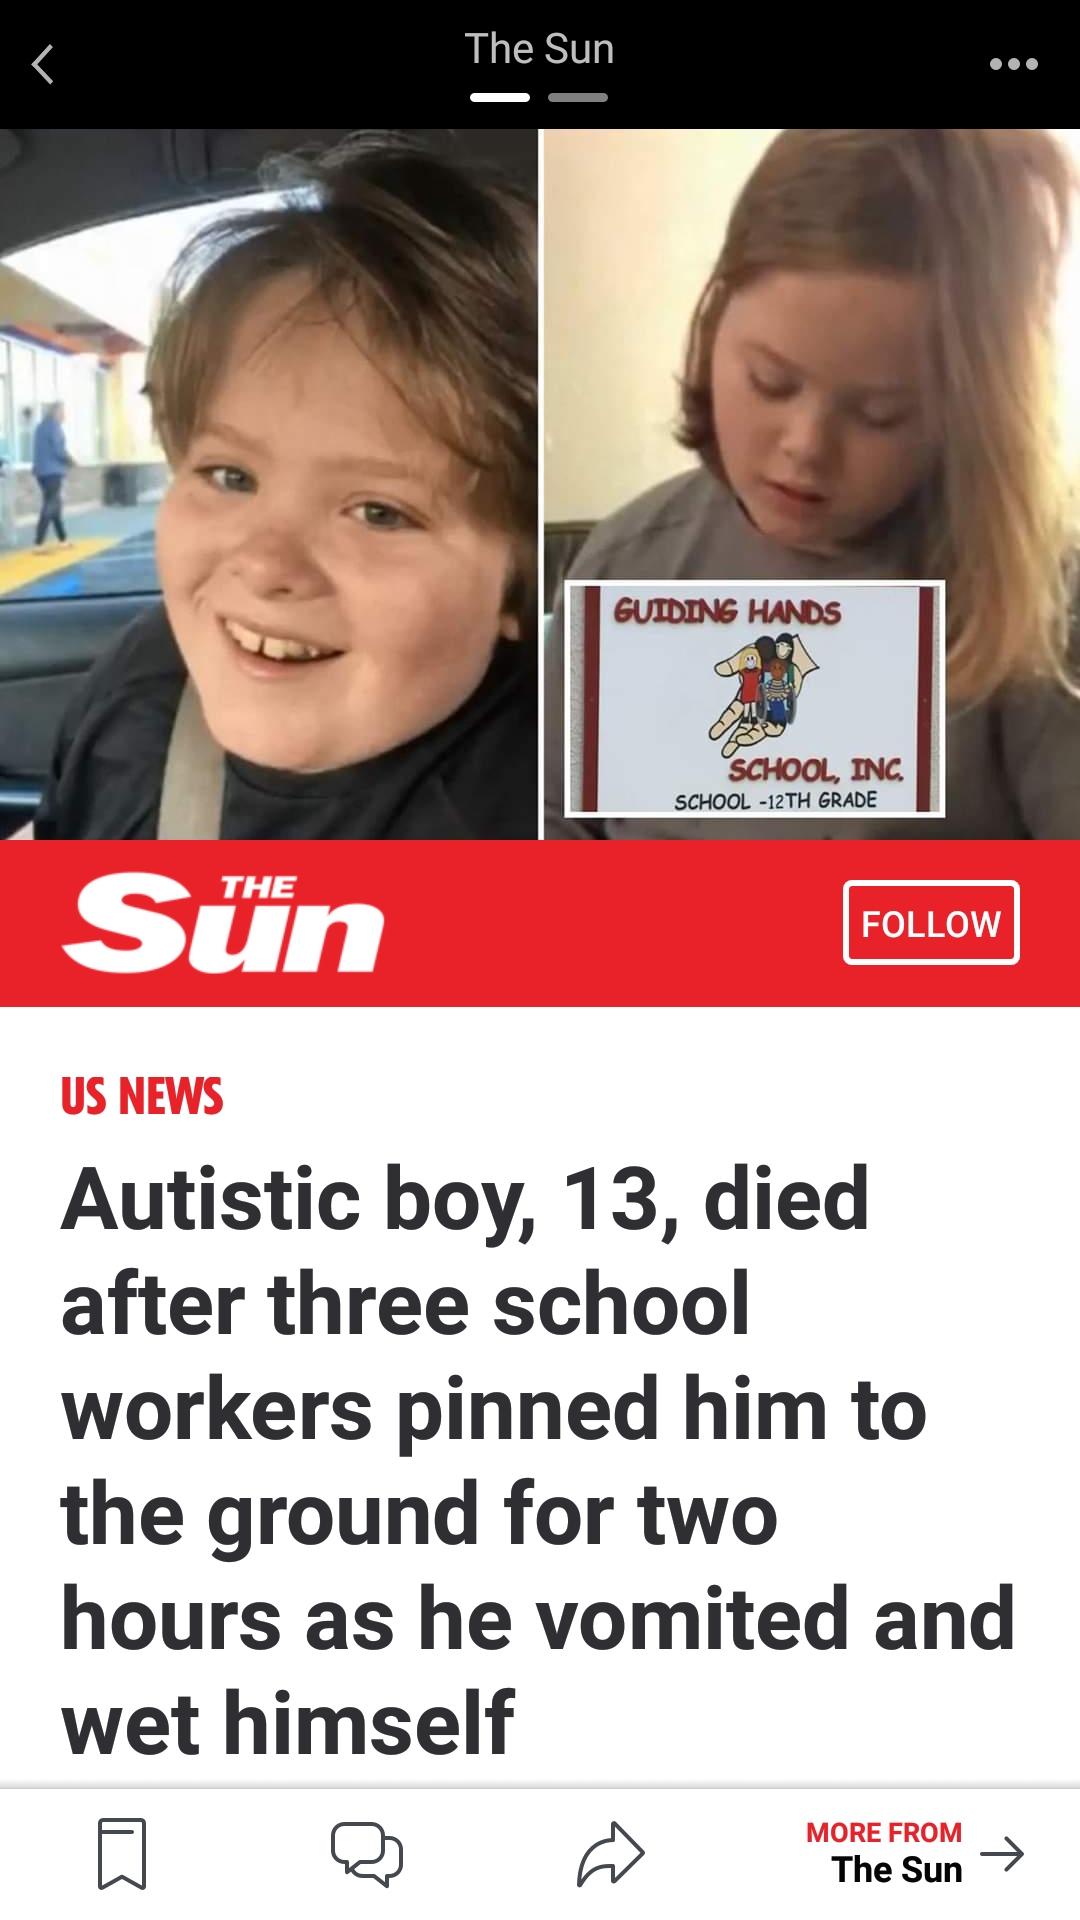 toddler - The Sun Guiding Hands School Inc Sn Us News Autistic boy, 13, died after three school workers pinned him to the ground for two hours as he vomited and wet himself